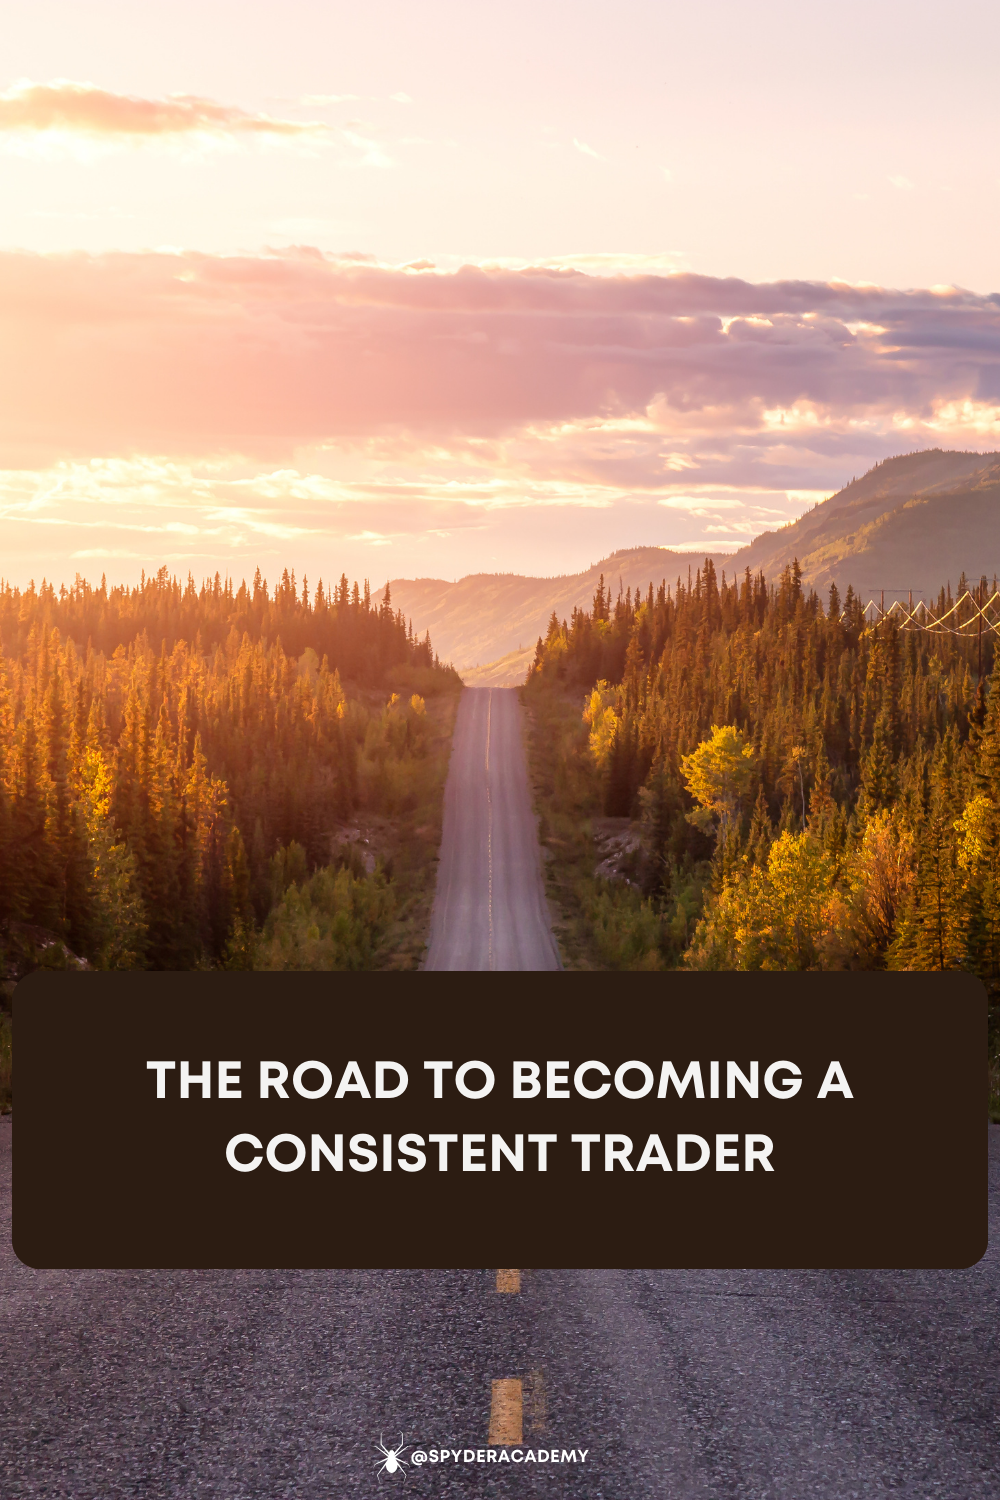 Embark on the challenging yet rewarding journey to consistency in trading. Learn key strategies, including prioritizing risk management, trading less but with quality, sticking to rules, and adopting a marathon mindset for long-term success.